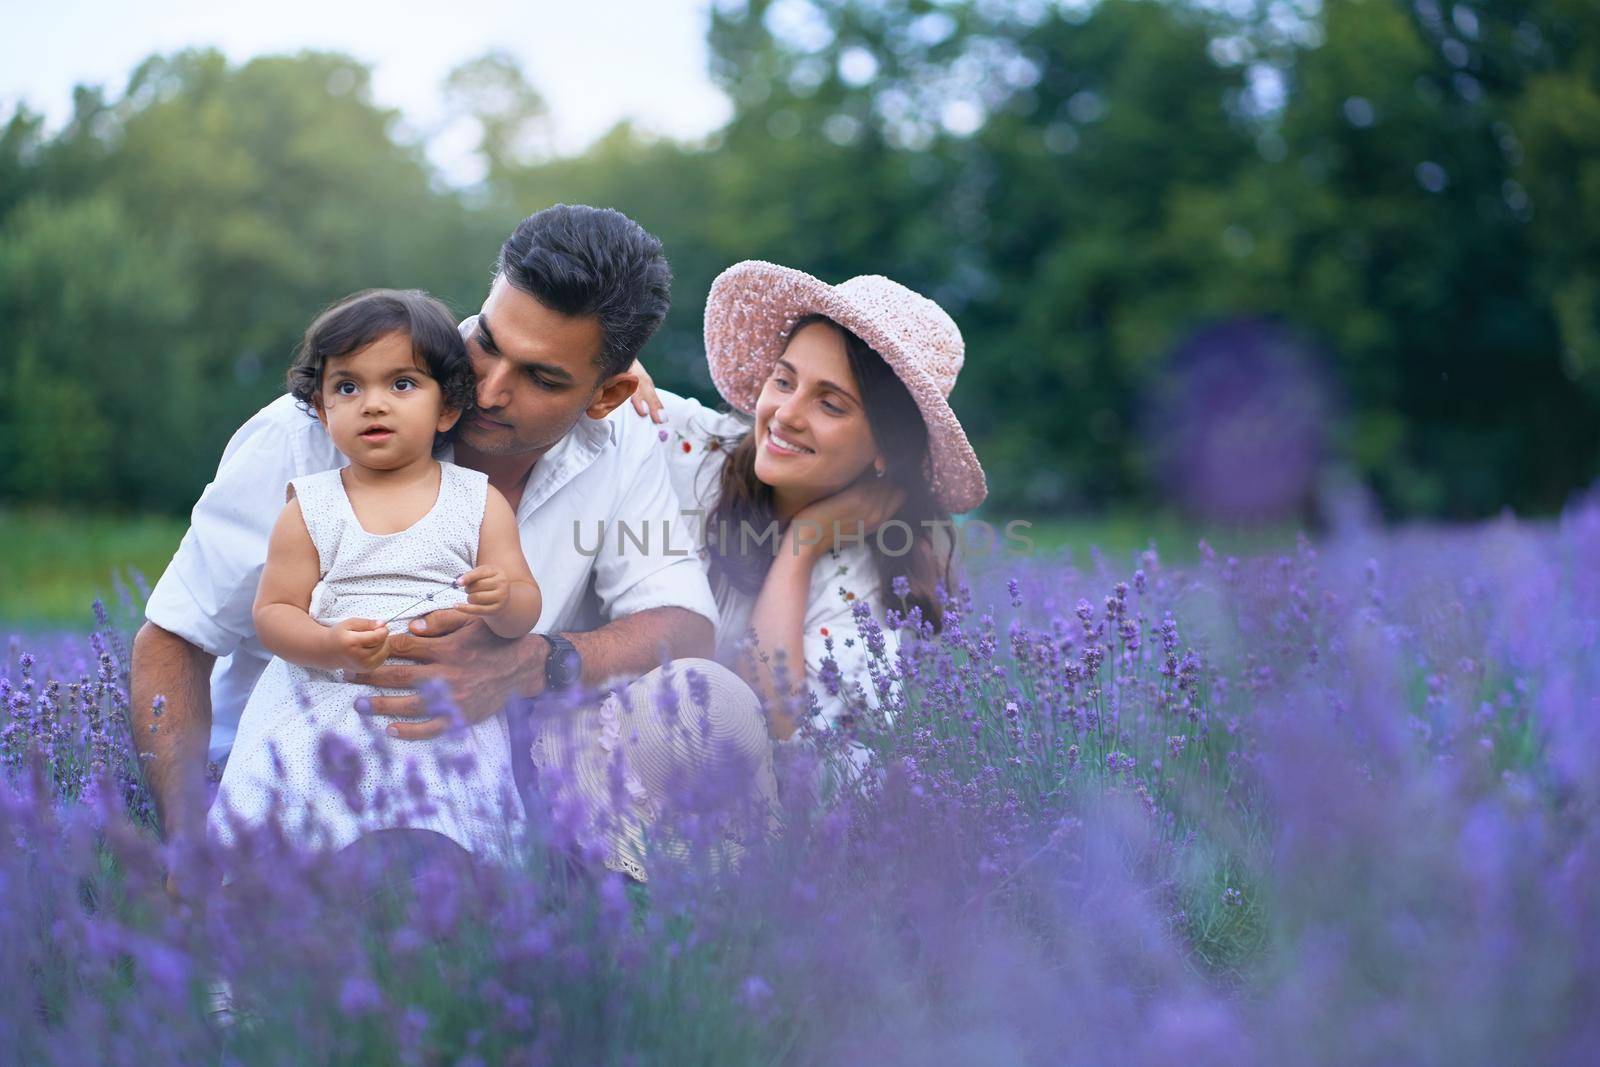 Front view of mother, father and daughter sitting in lavender field and smiling. Cute baby girl, carrying flower and enjoying time with loving parents outdoors. Young family, nature concept.